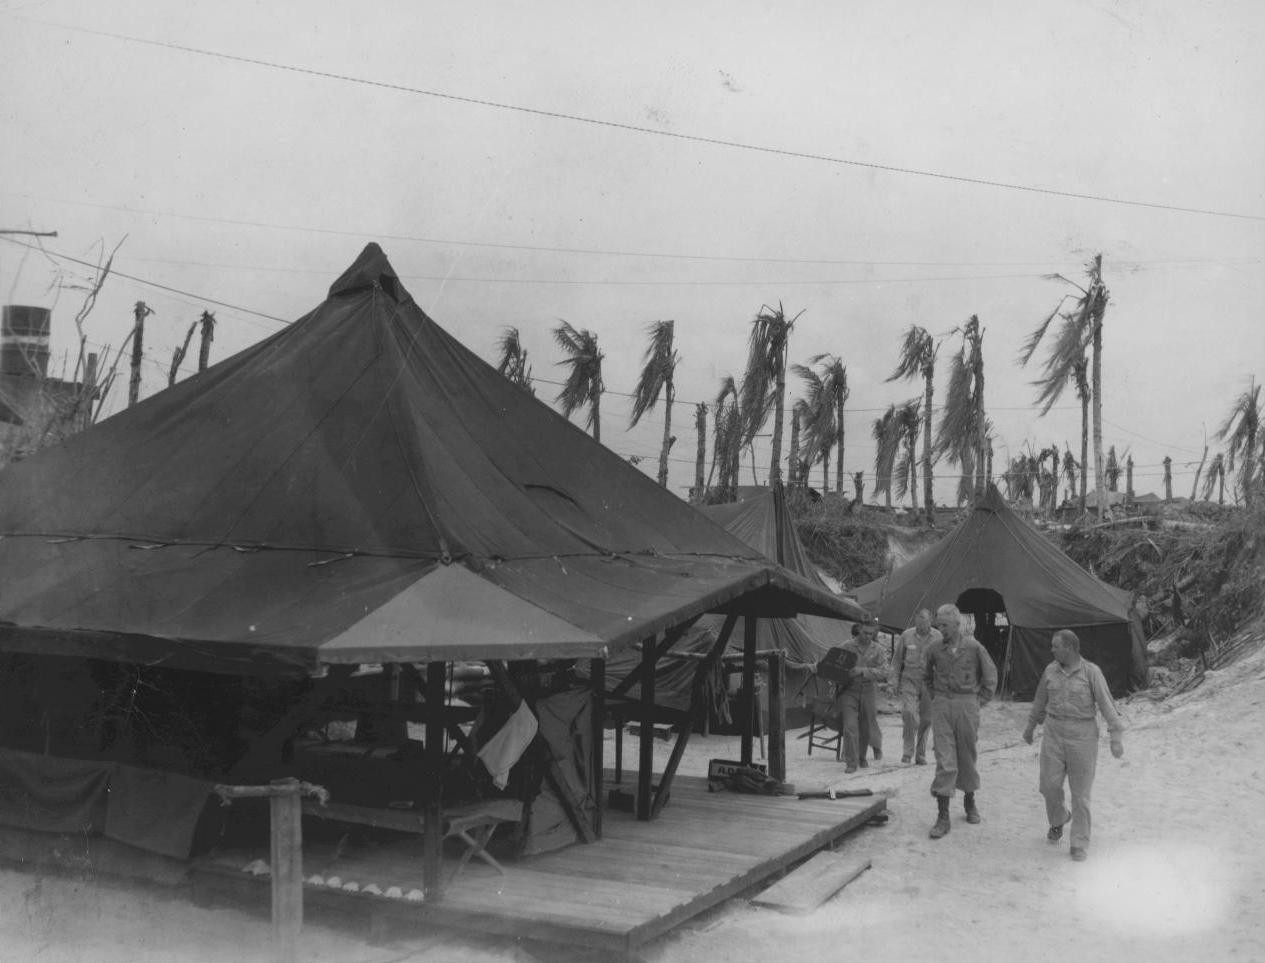 Oliver P. Smith walking through his Assistant Division Commander quarters on Peleliu, Palau Islands, 1944